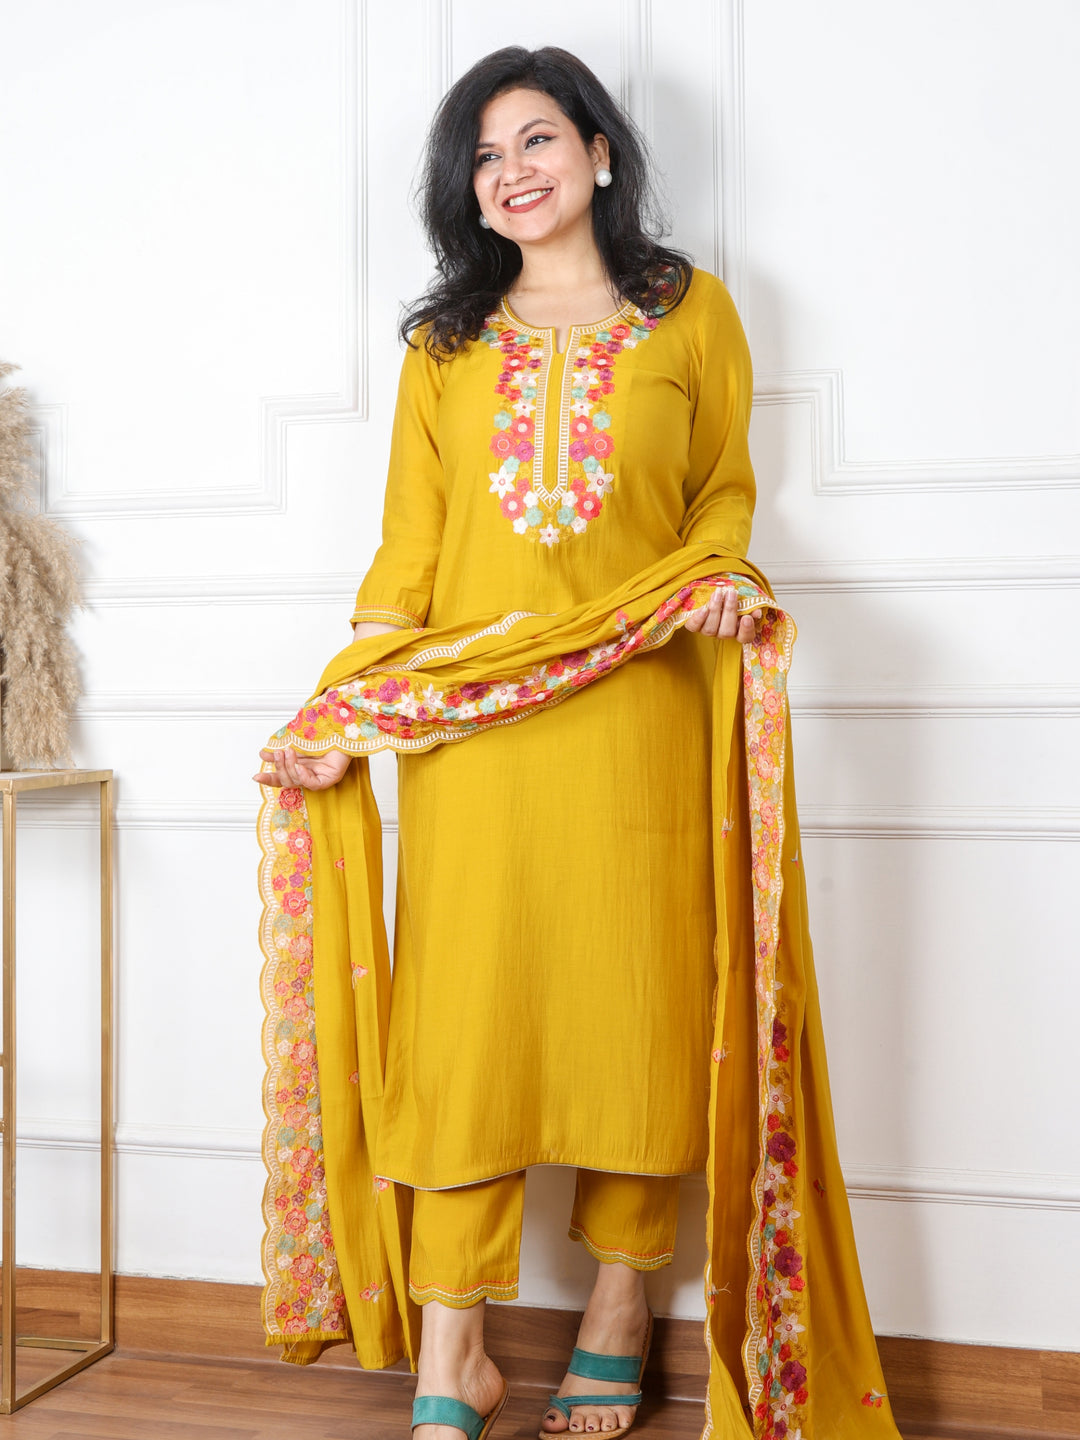 Naina Dandelion Yellow Floral Thread Embroidered Neck Modal Suit 3 Piece Set